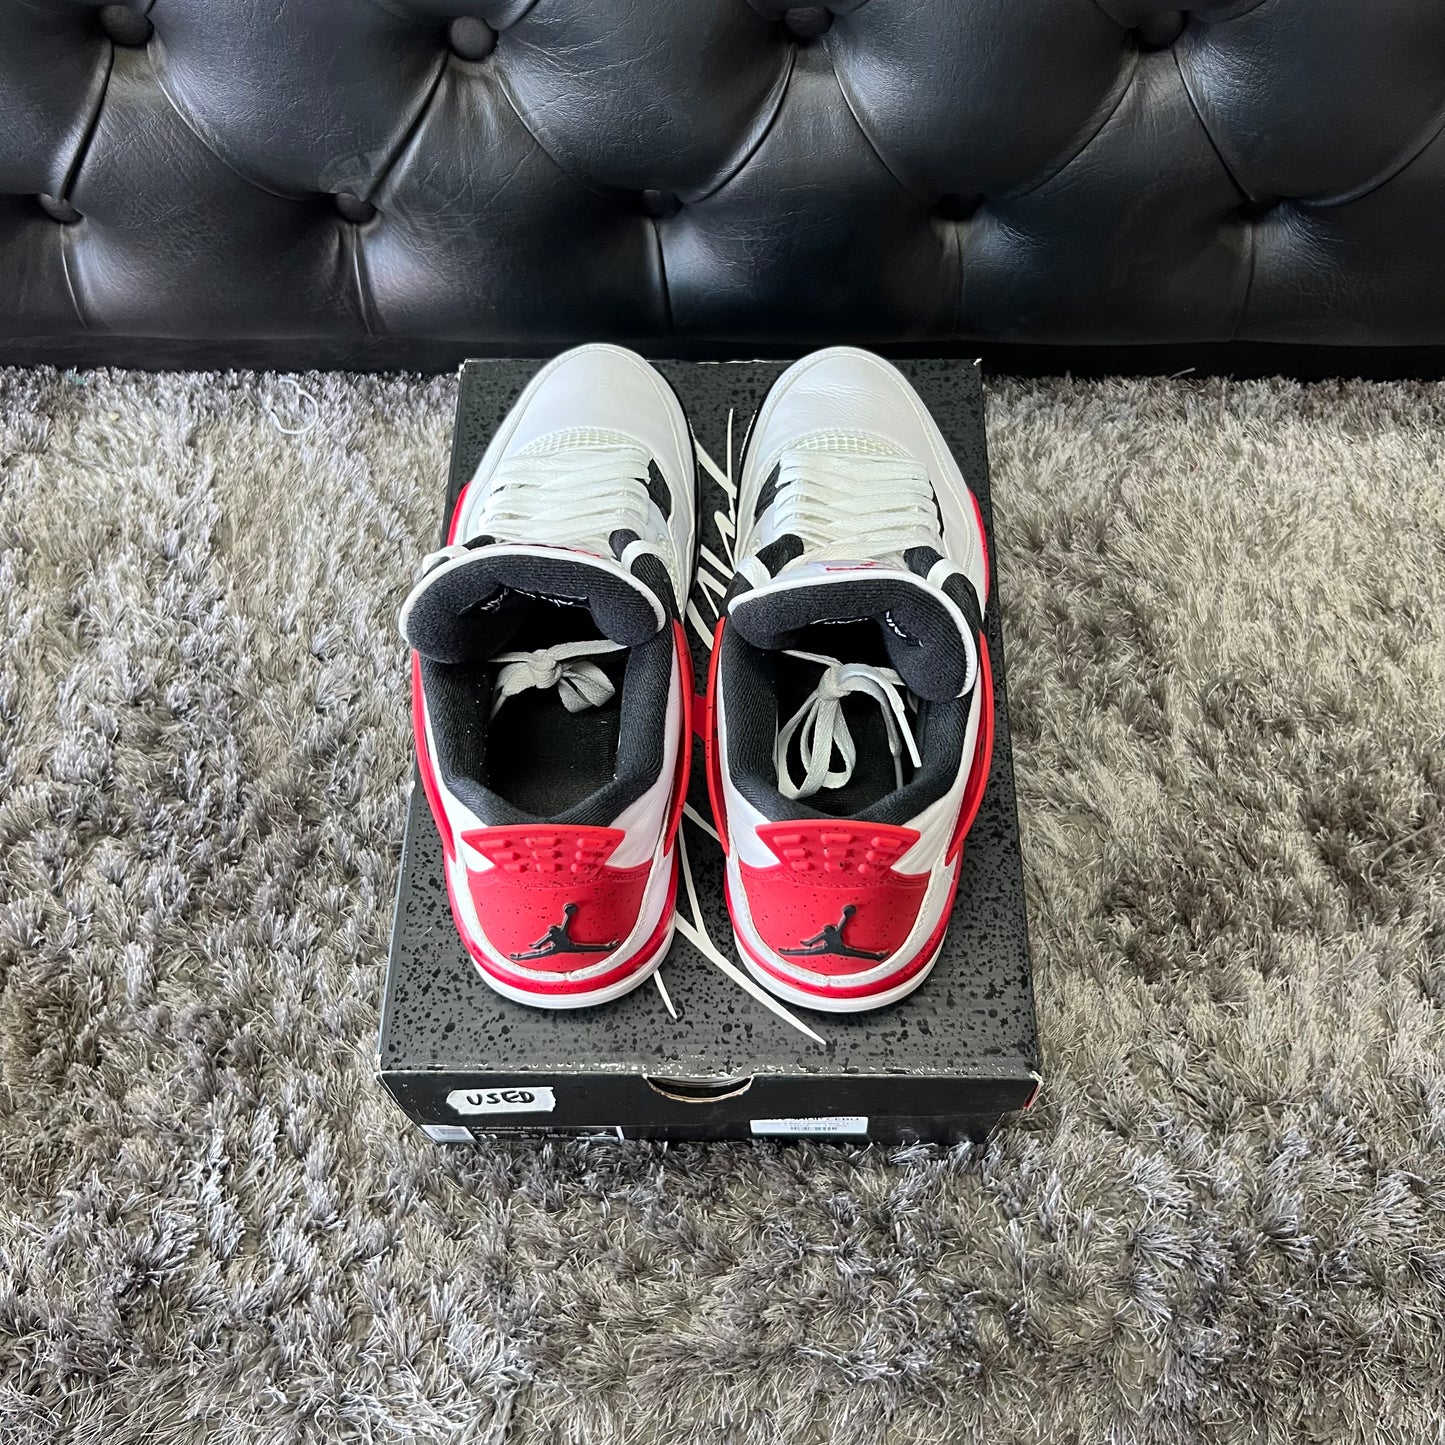 Jordan 4 Red Cement size 11 used